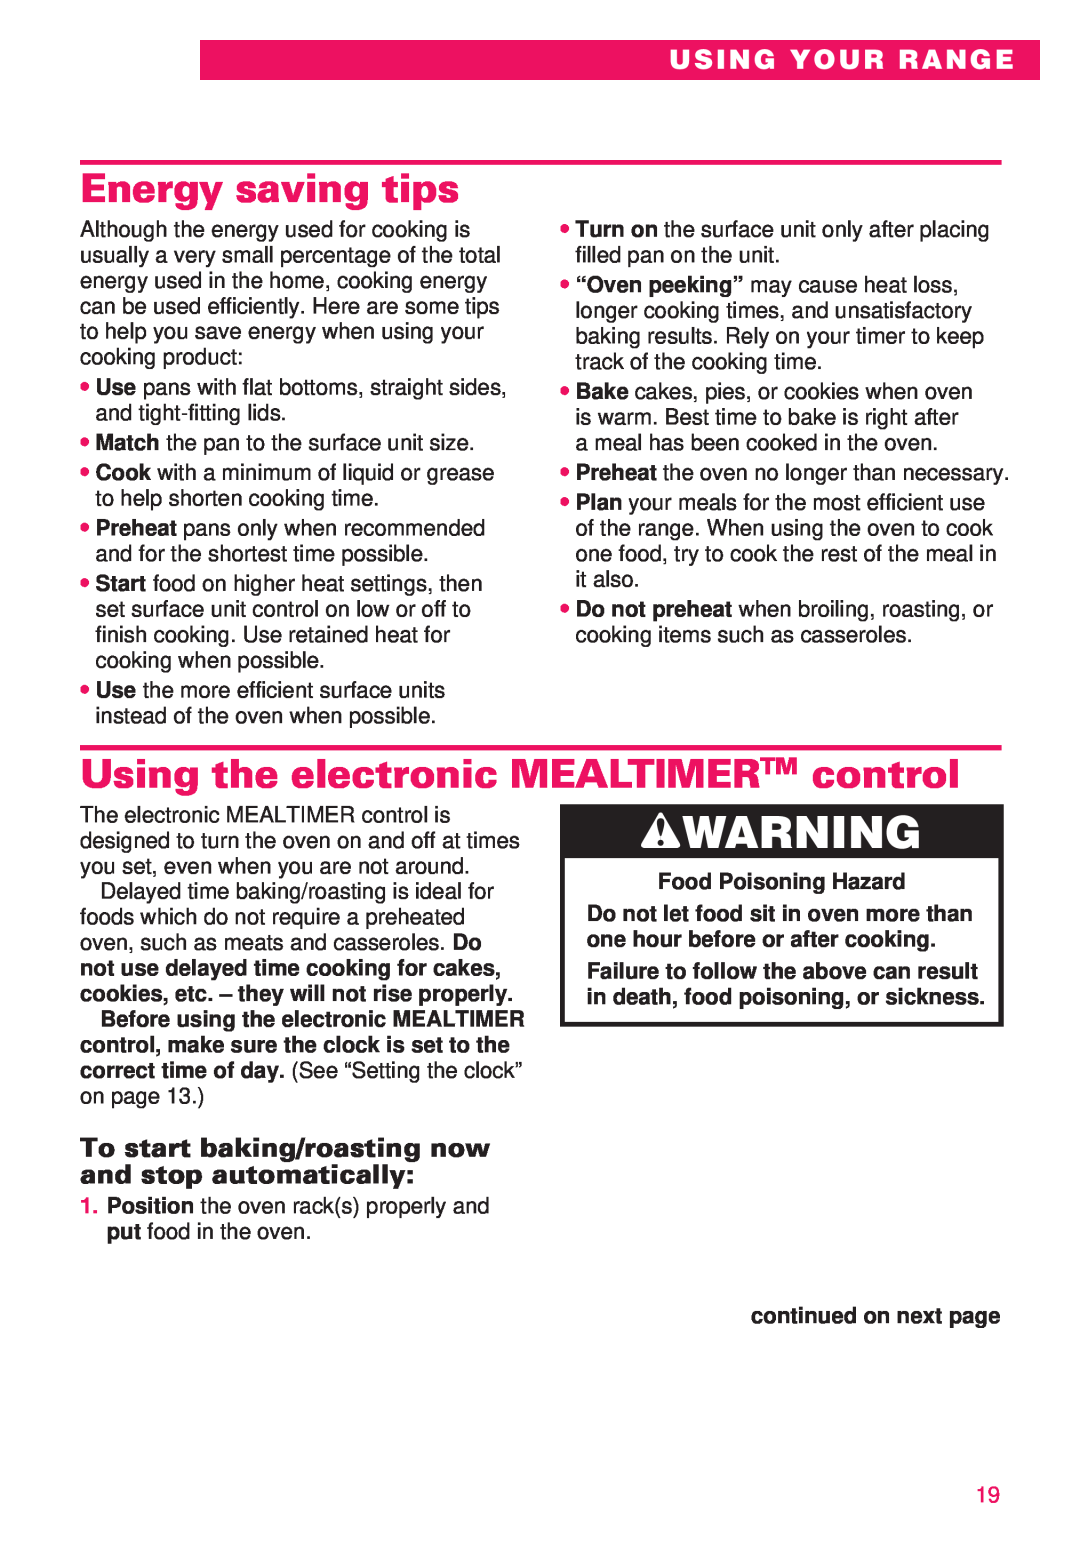 Whirlpool RS386PXE Energy saving tips, Using the electronic MEALTIMERTM control, wWARNING, Using Your Range 